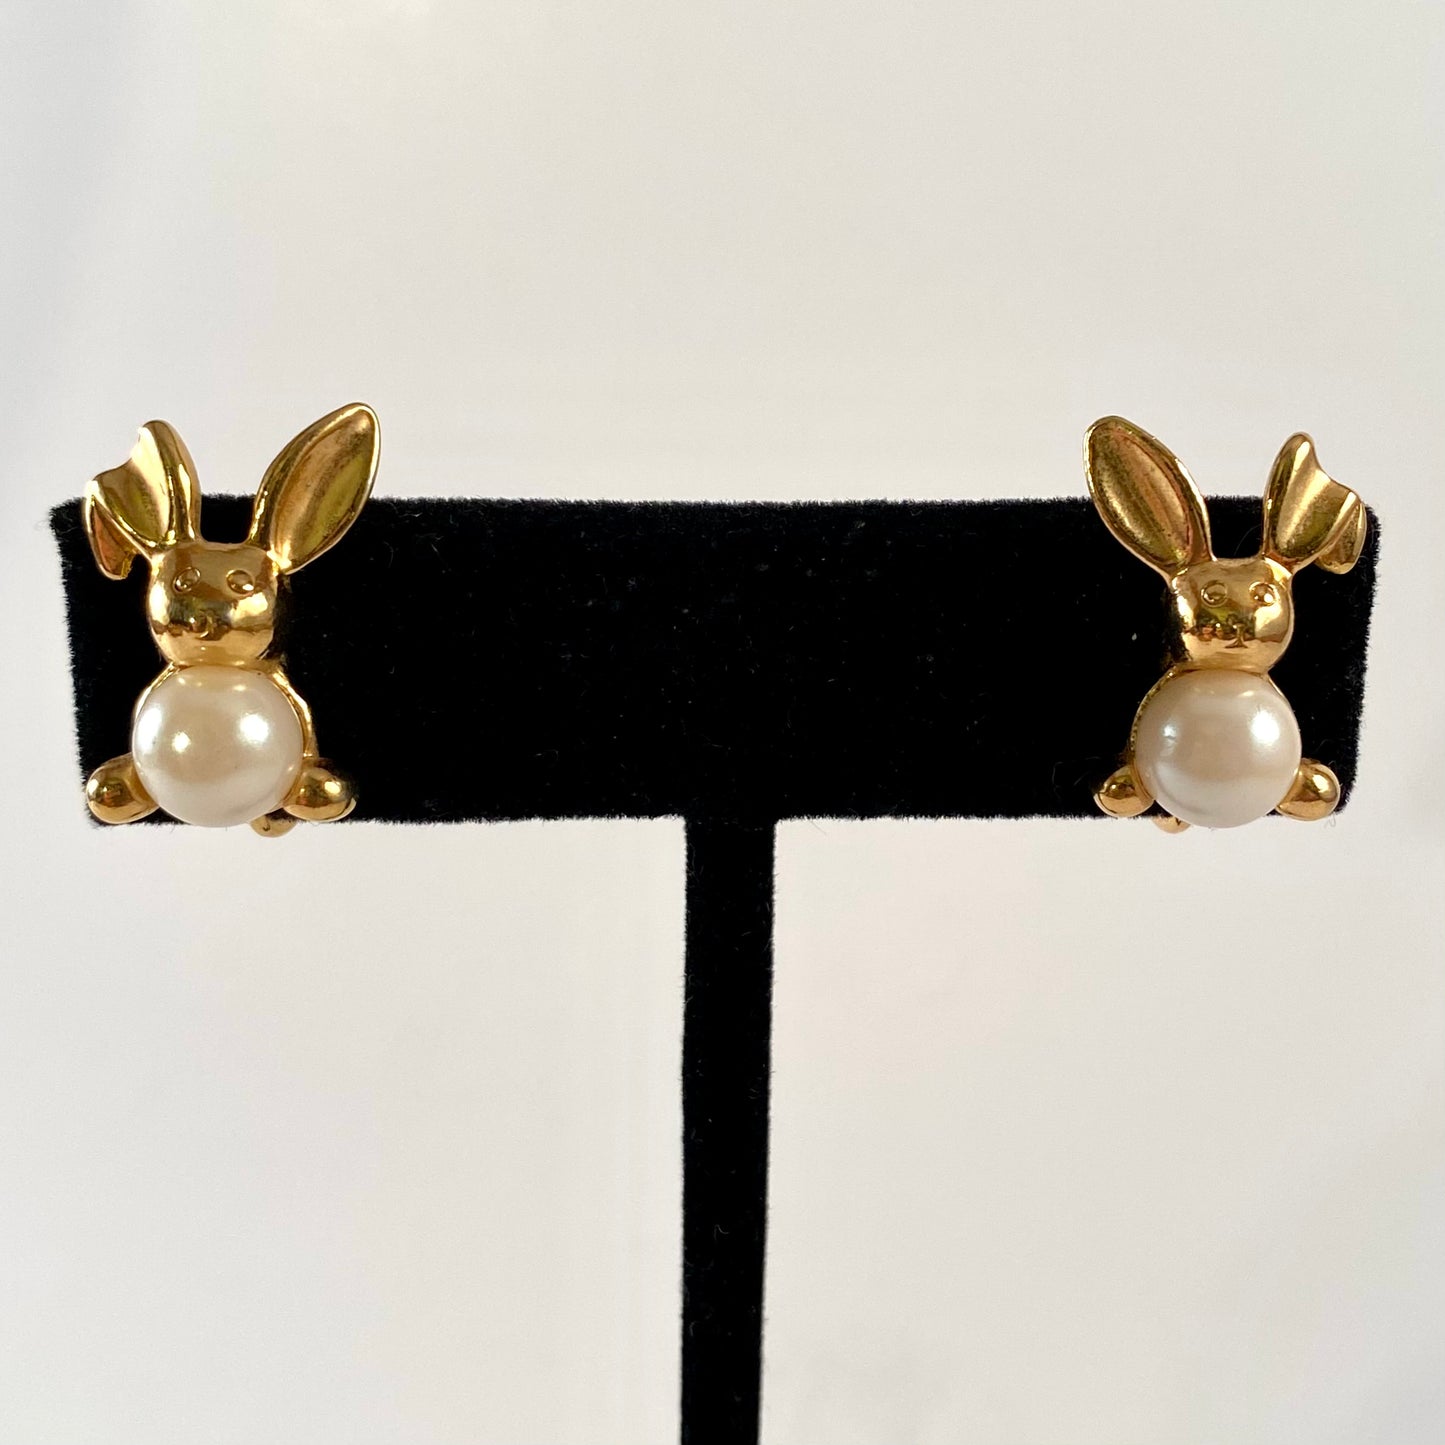 1995 Avon Pearly Bunny Earrings With Original Box